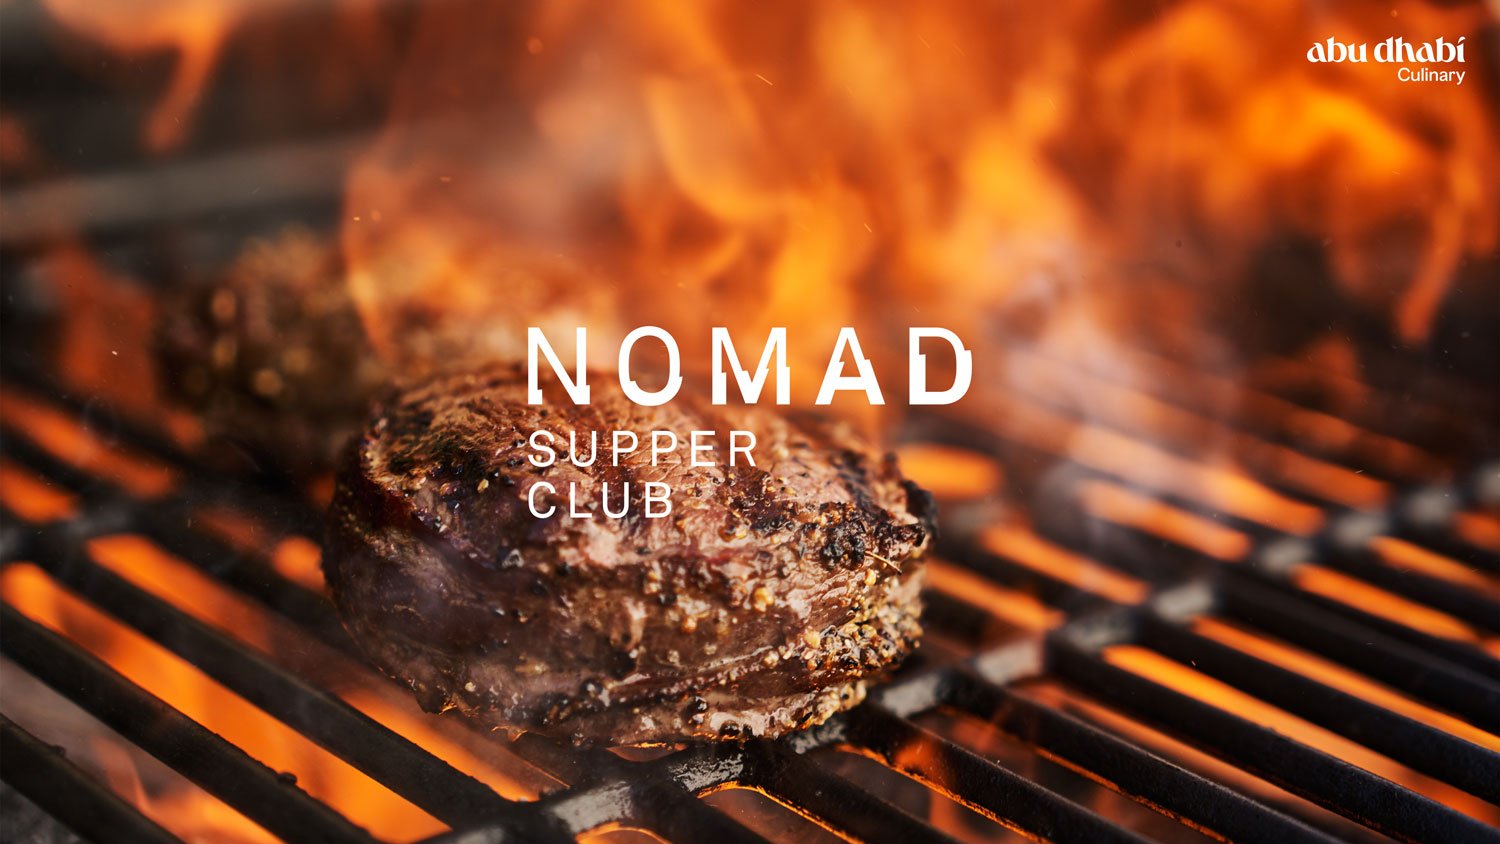 The Nomad Supper Club